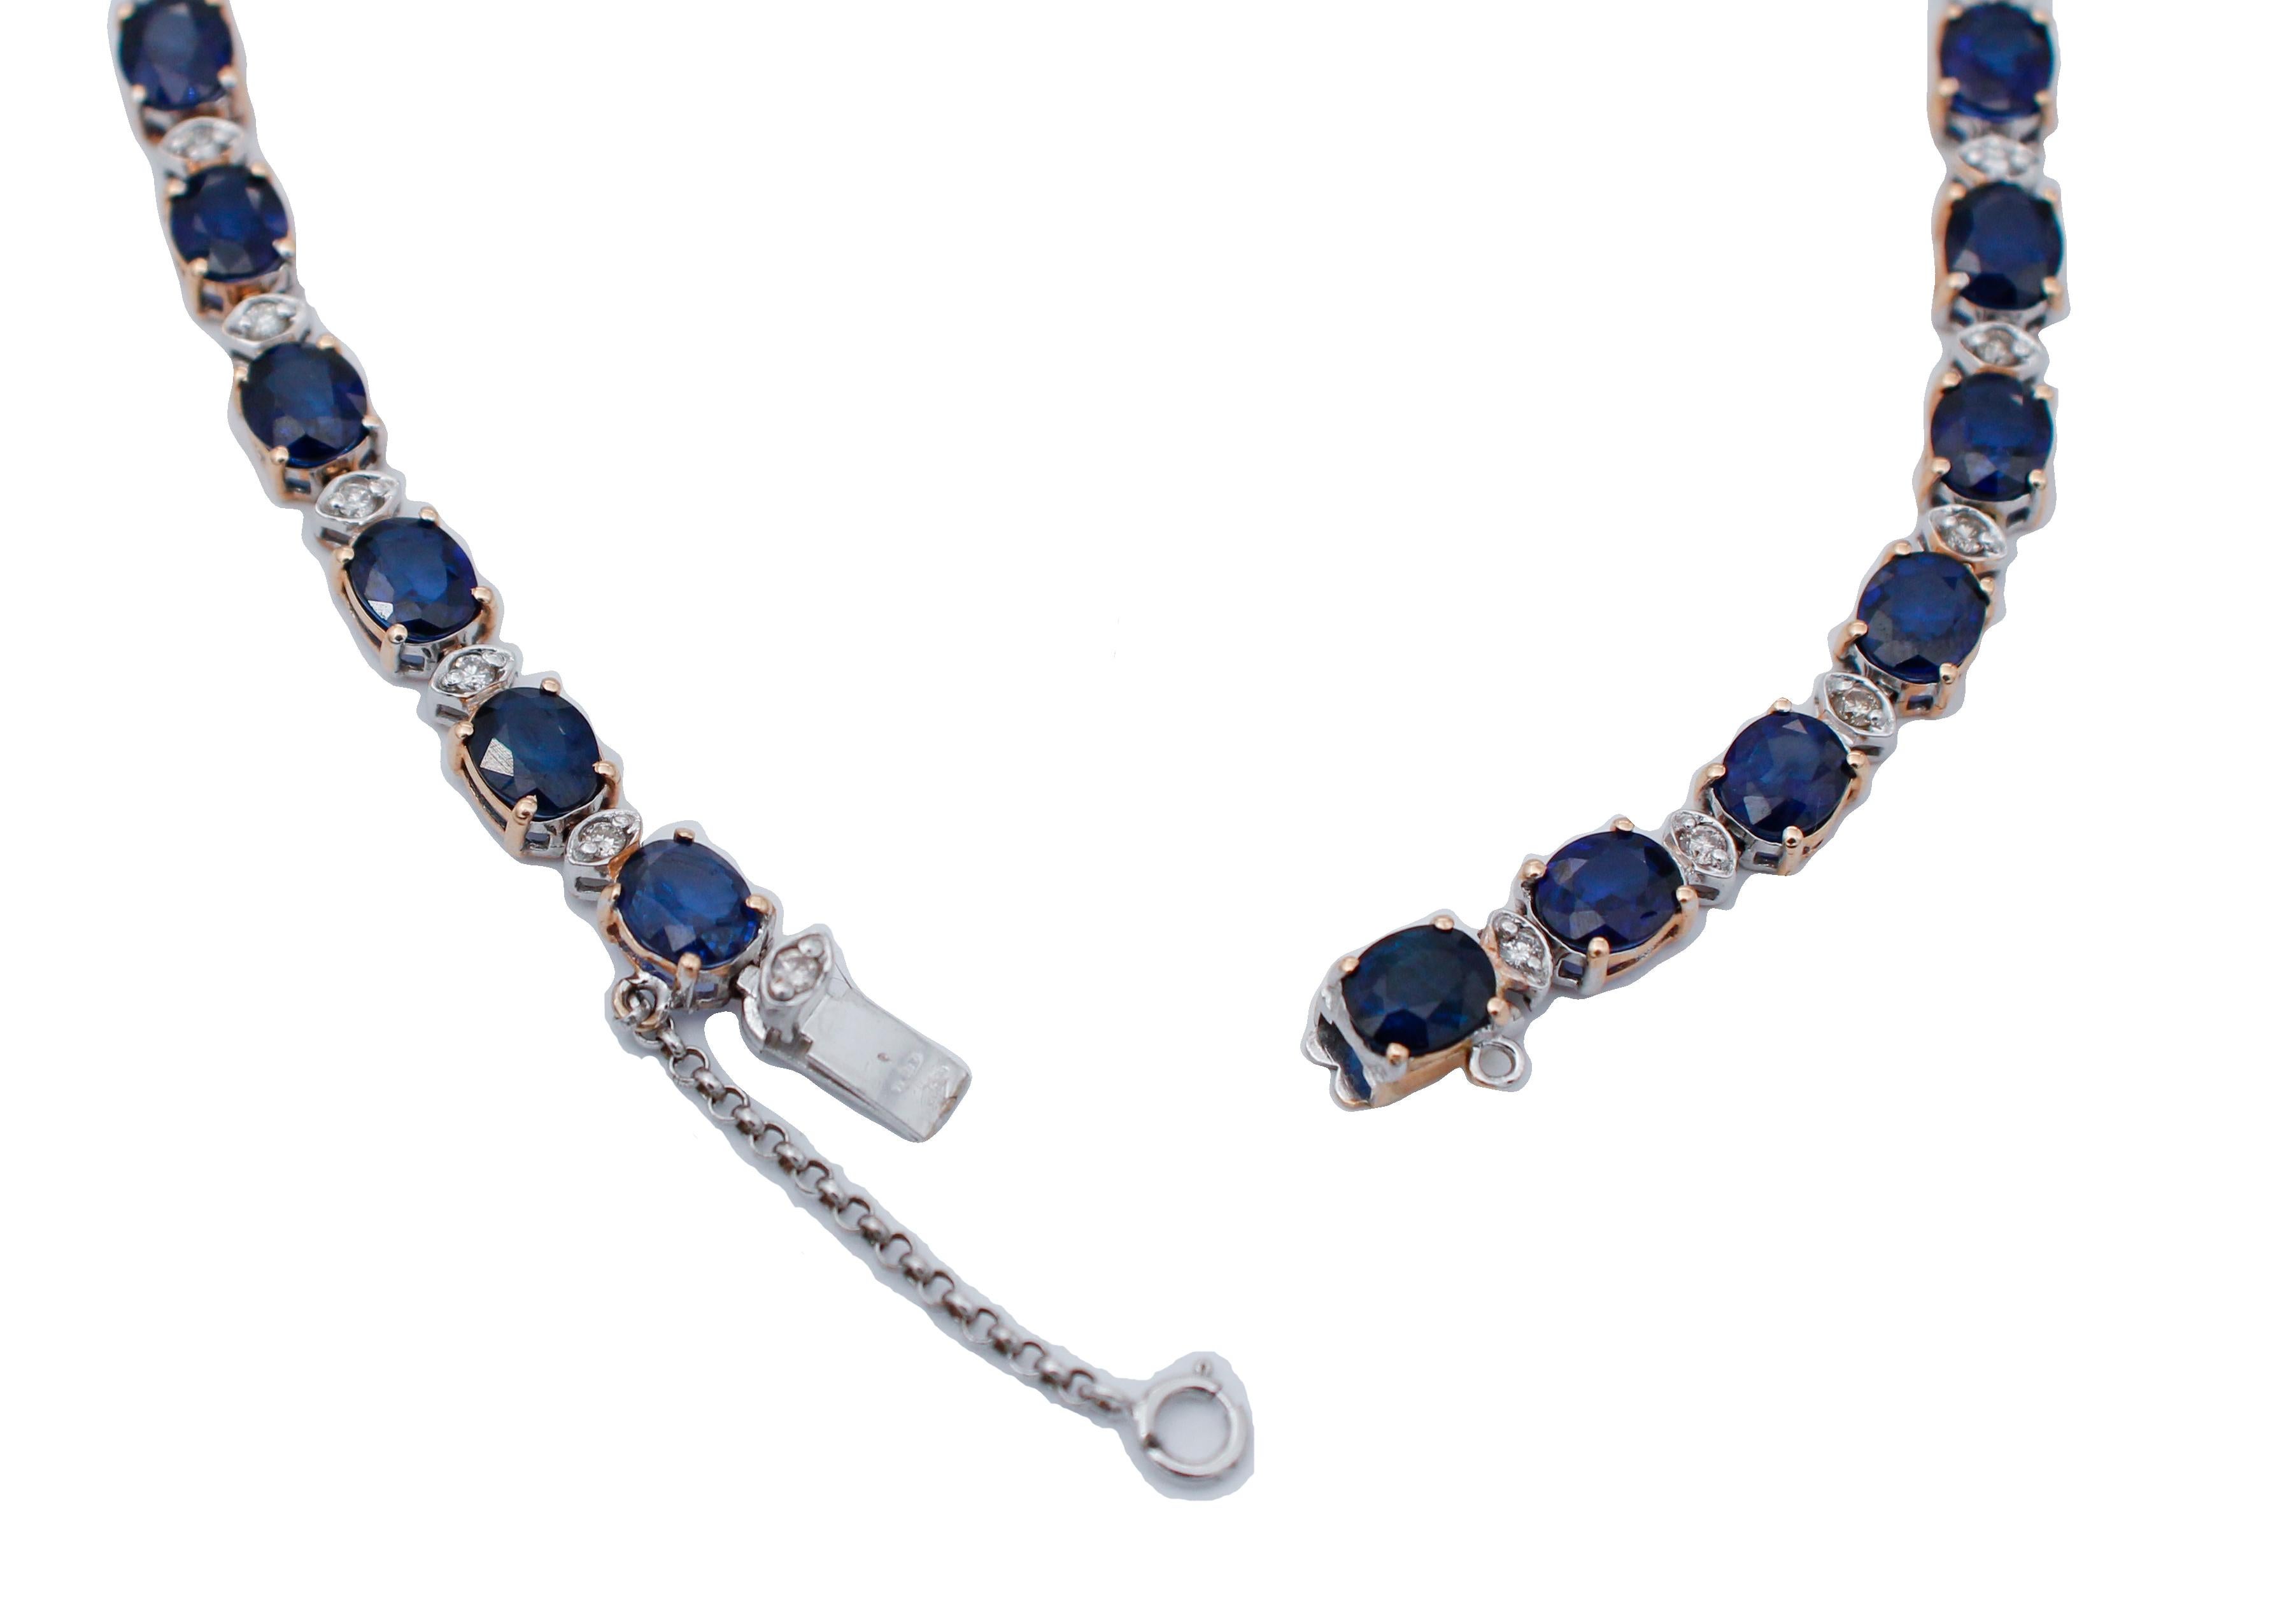 Mixed Cut Rubies, Blue Sapphires, Diamonds, 14 Karat White and Rose Necklace